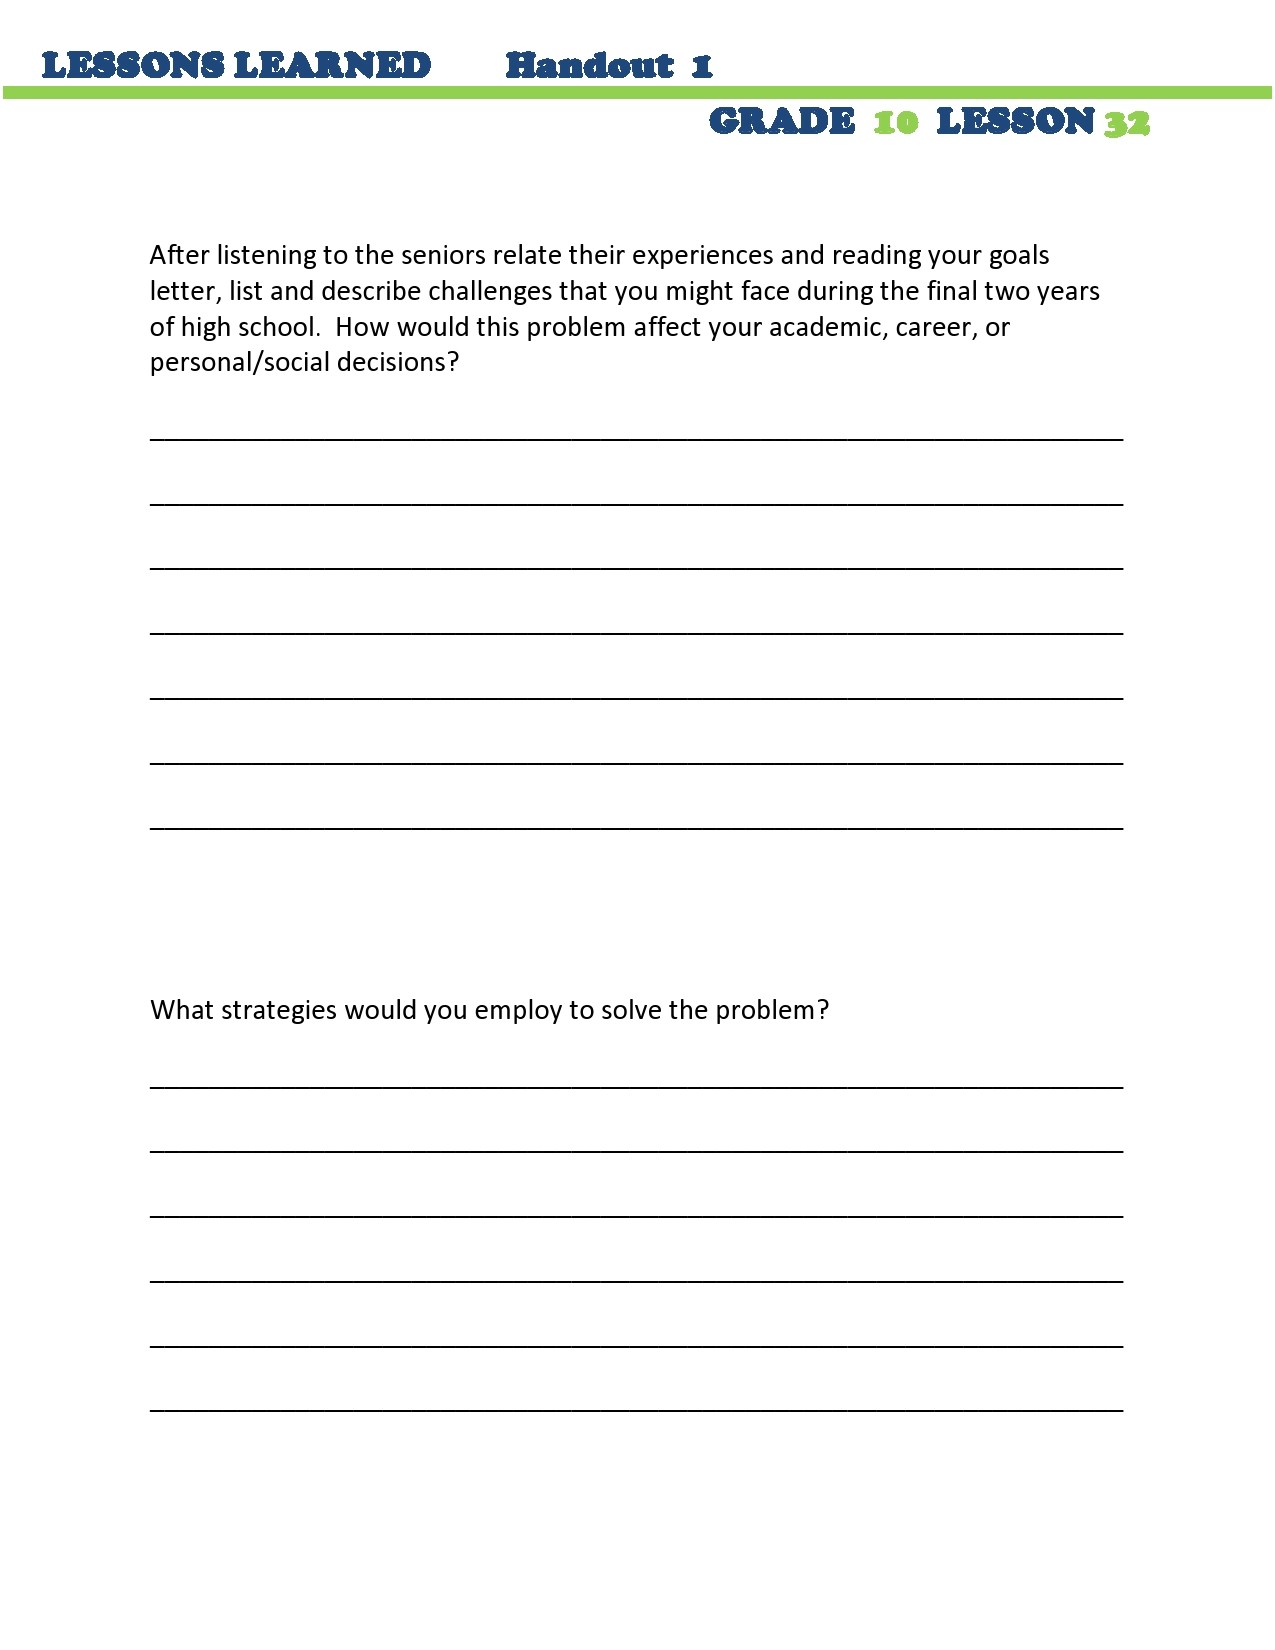 Free lessons learned template 09